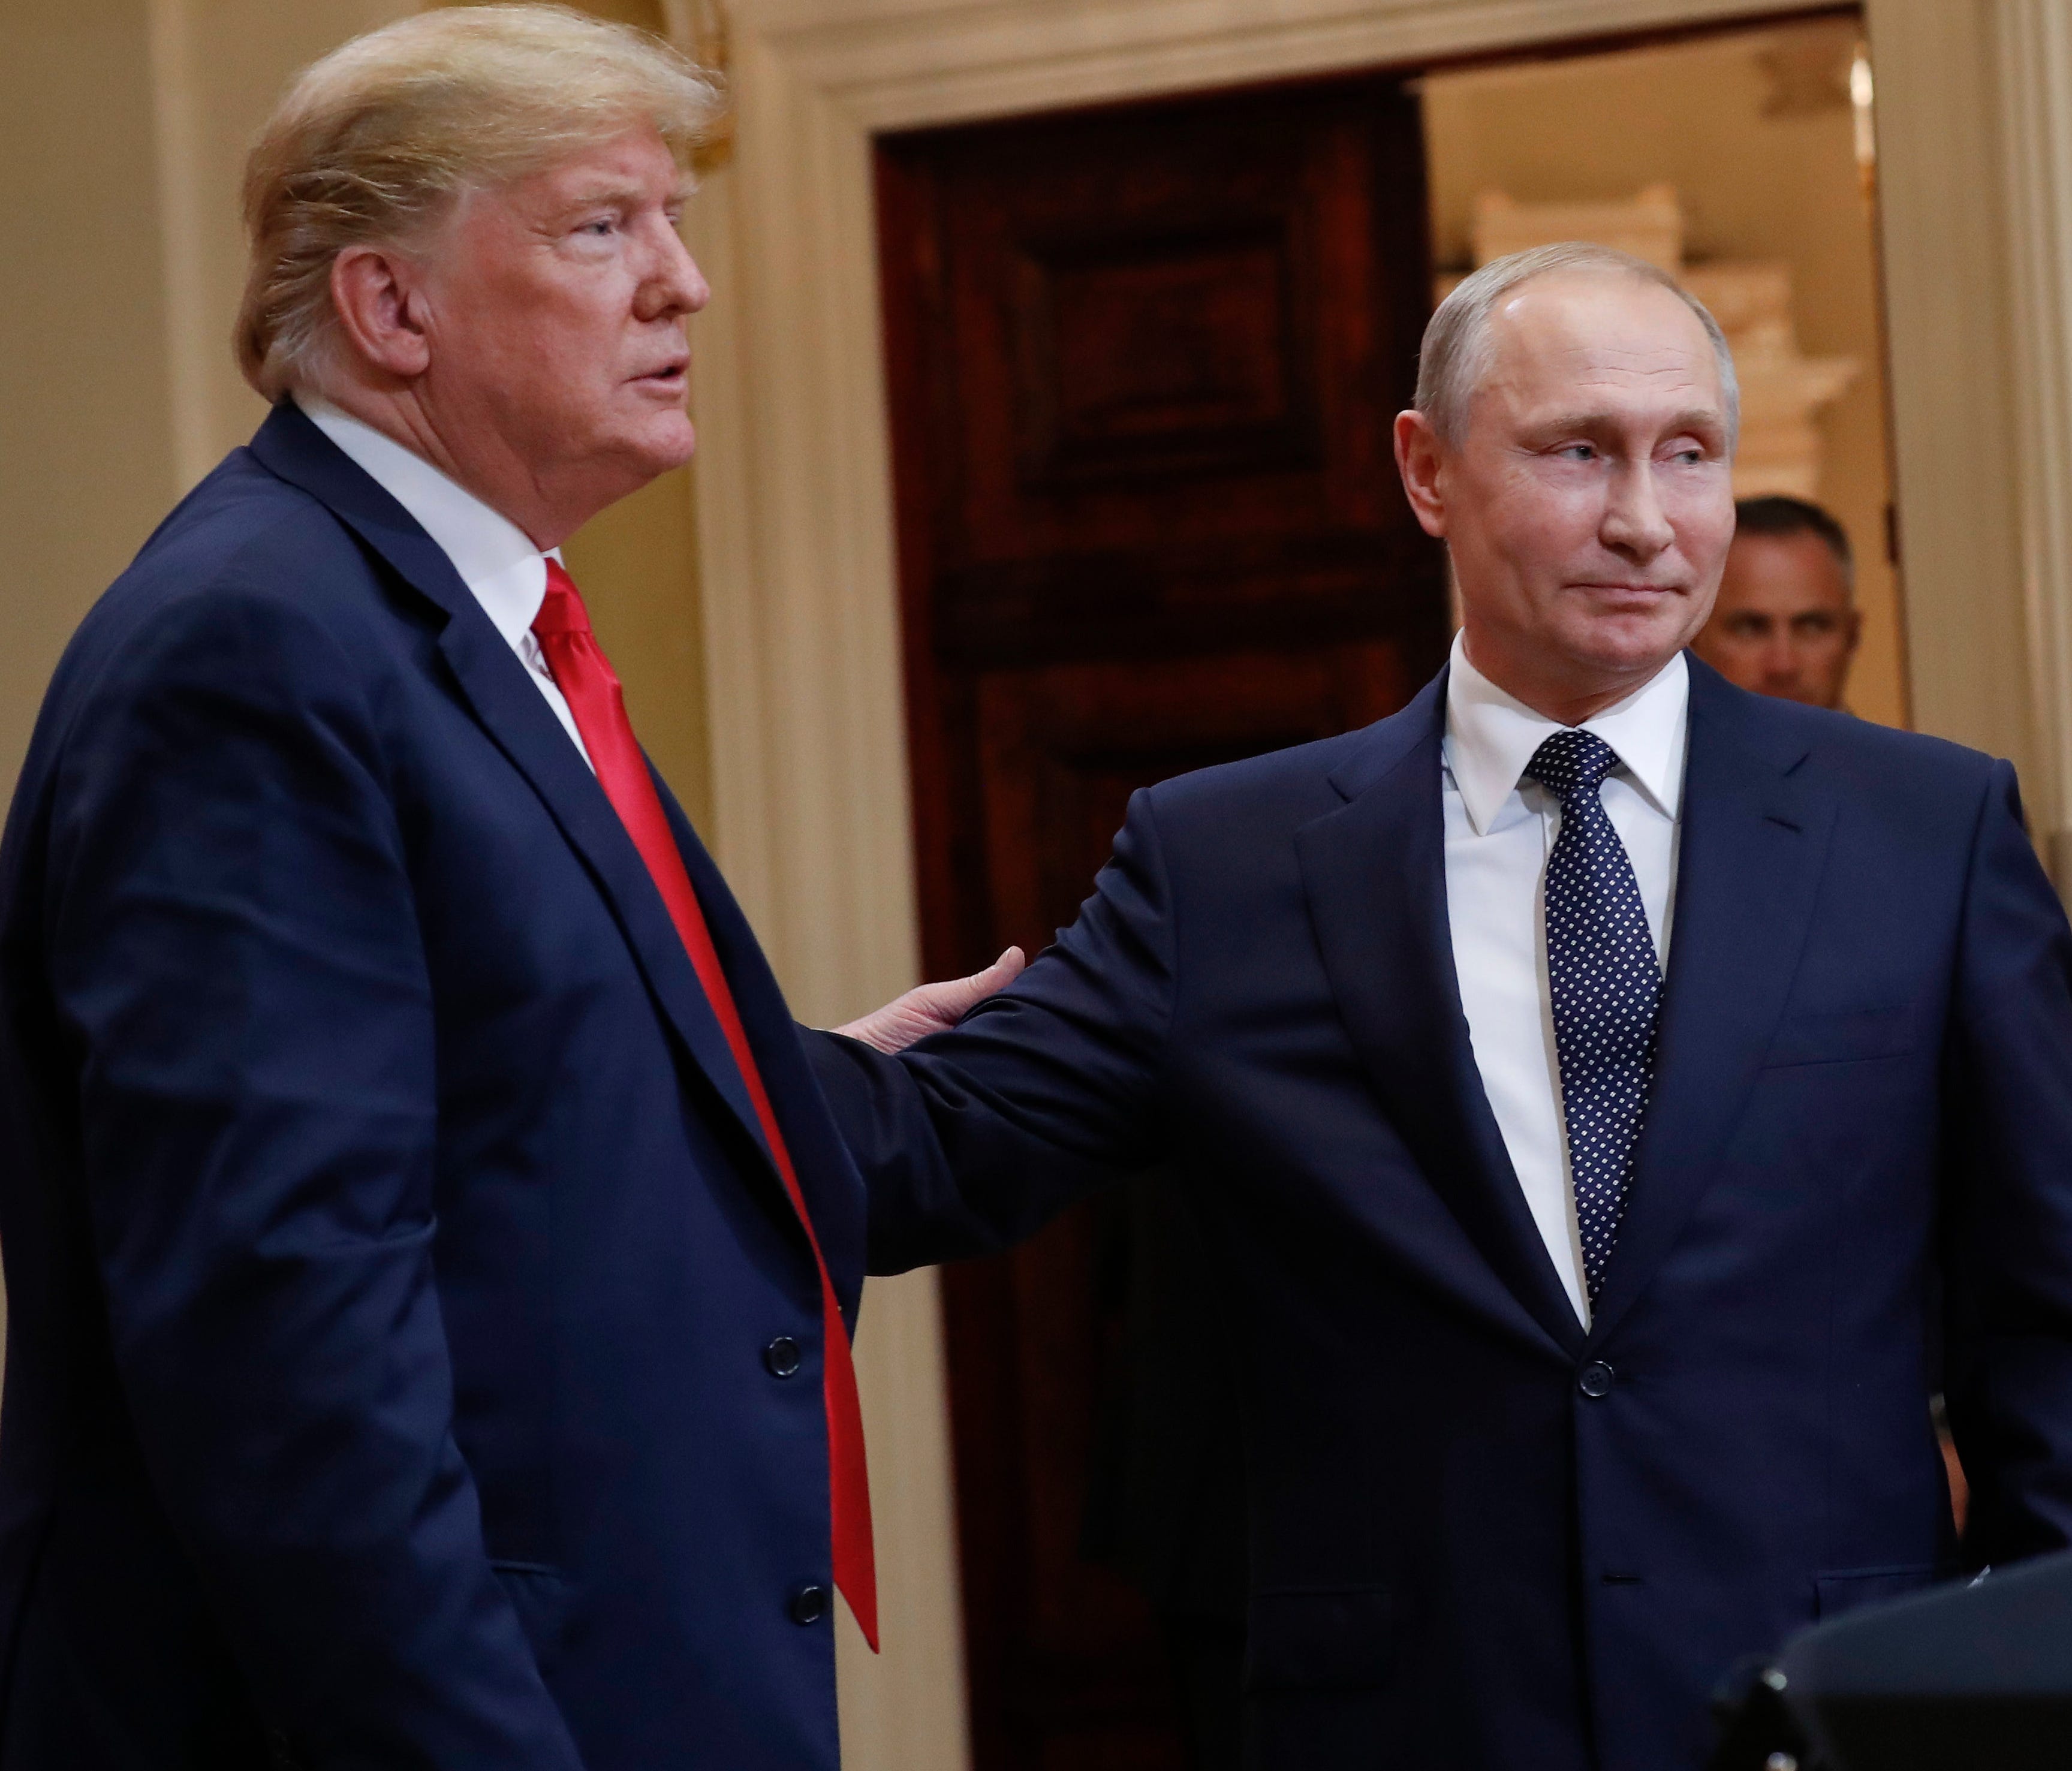 President Donald Trump (left) and Russian President Vladimir Putin (right) leave the stage together at the conclusion of their joint news conference at the Presidential Palace in Helsinki, Finland.